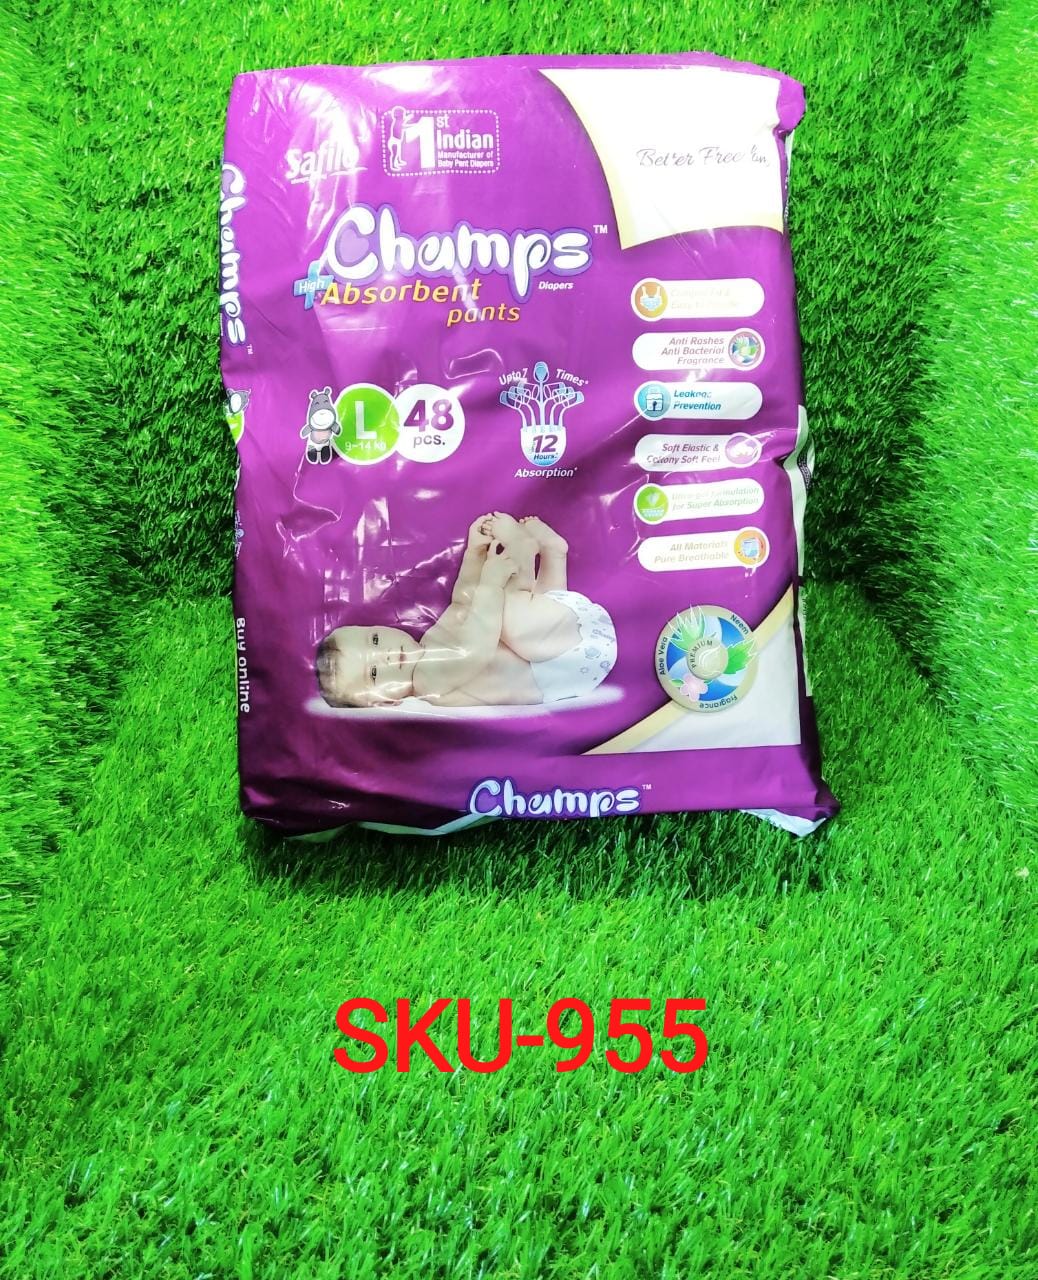 955 Premium Champs High Absorbent Pant Style Diaper Large Size, 48 Pieces(955_Large_48) Champs